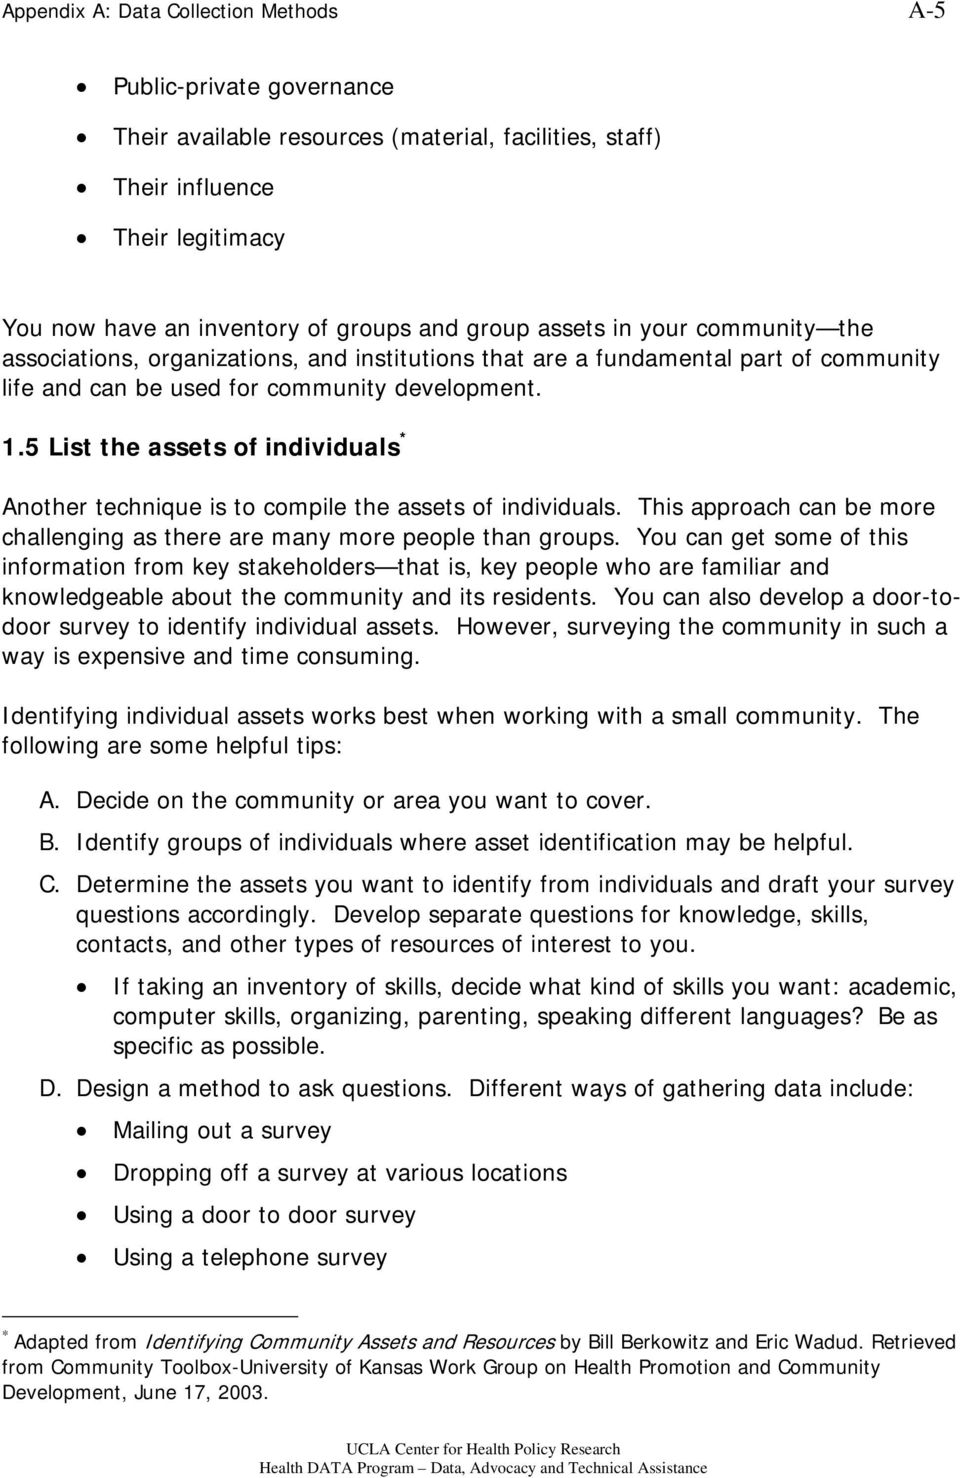 5 List the assets of individuals * Another technique is to compile the assets of individuals. This approach can be more challenging as there are many more people than groups.